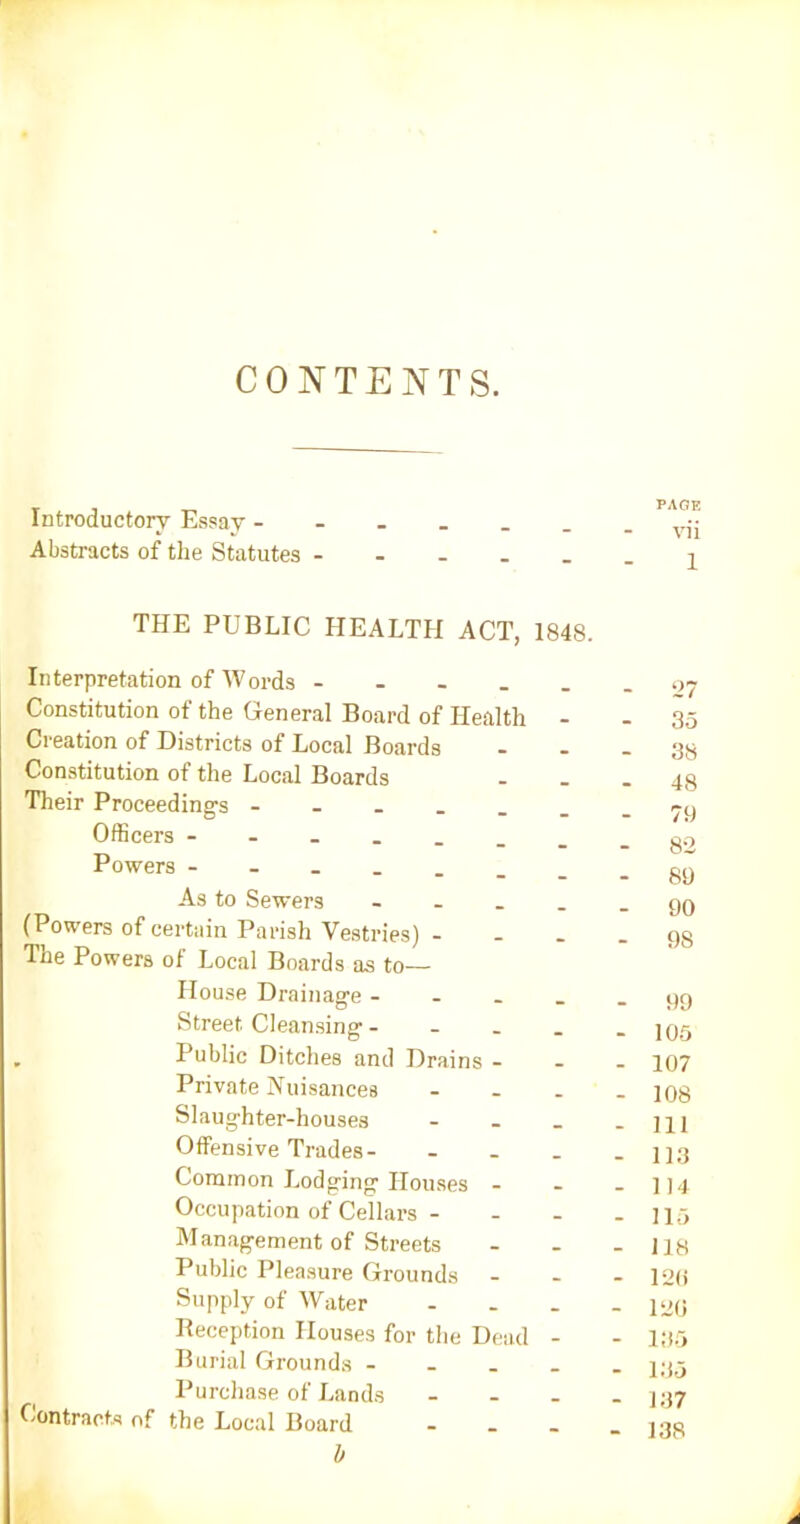 CONTENTS. Introductory Essay - Abstracts of the Statutes - PAGE vii 1 THE PUBLIC HEALTH ACT, 1848. Interpretation of Words - Constitution of the General Board of Health - Creation of Districts of Local Boards Constitution ot the Local Boards Their Proceeding's Officers Powers As to Sewers - (Powers of certain Parish Vestries) - The Powers of Local Boards as to— House Drainage - Street Cleansing - . Public Ditches and Drains - Private Nuisances - Slaughter-houses - Offensive Trades- ... Common Lodging Houses - Occupation of Cellars - Management of Streets Public Pleasure Grounds - Supply of Water - Reception Houses for the Dead - Burial Grounds - Purchase of Lands ... Contracts 0f the Local Board b 35 38 48 79 82 89 90 9S 99 105 107 108 111 113 114 115 118 120 120 135 135 137 138